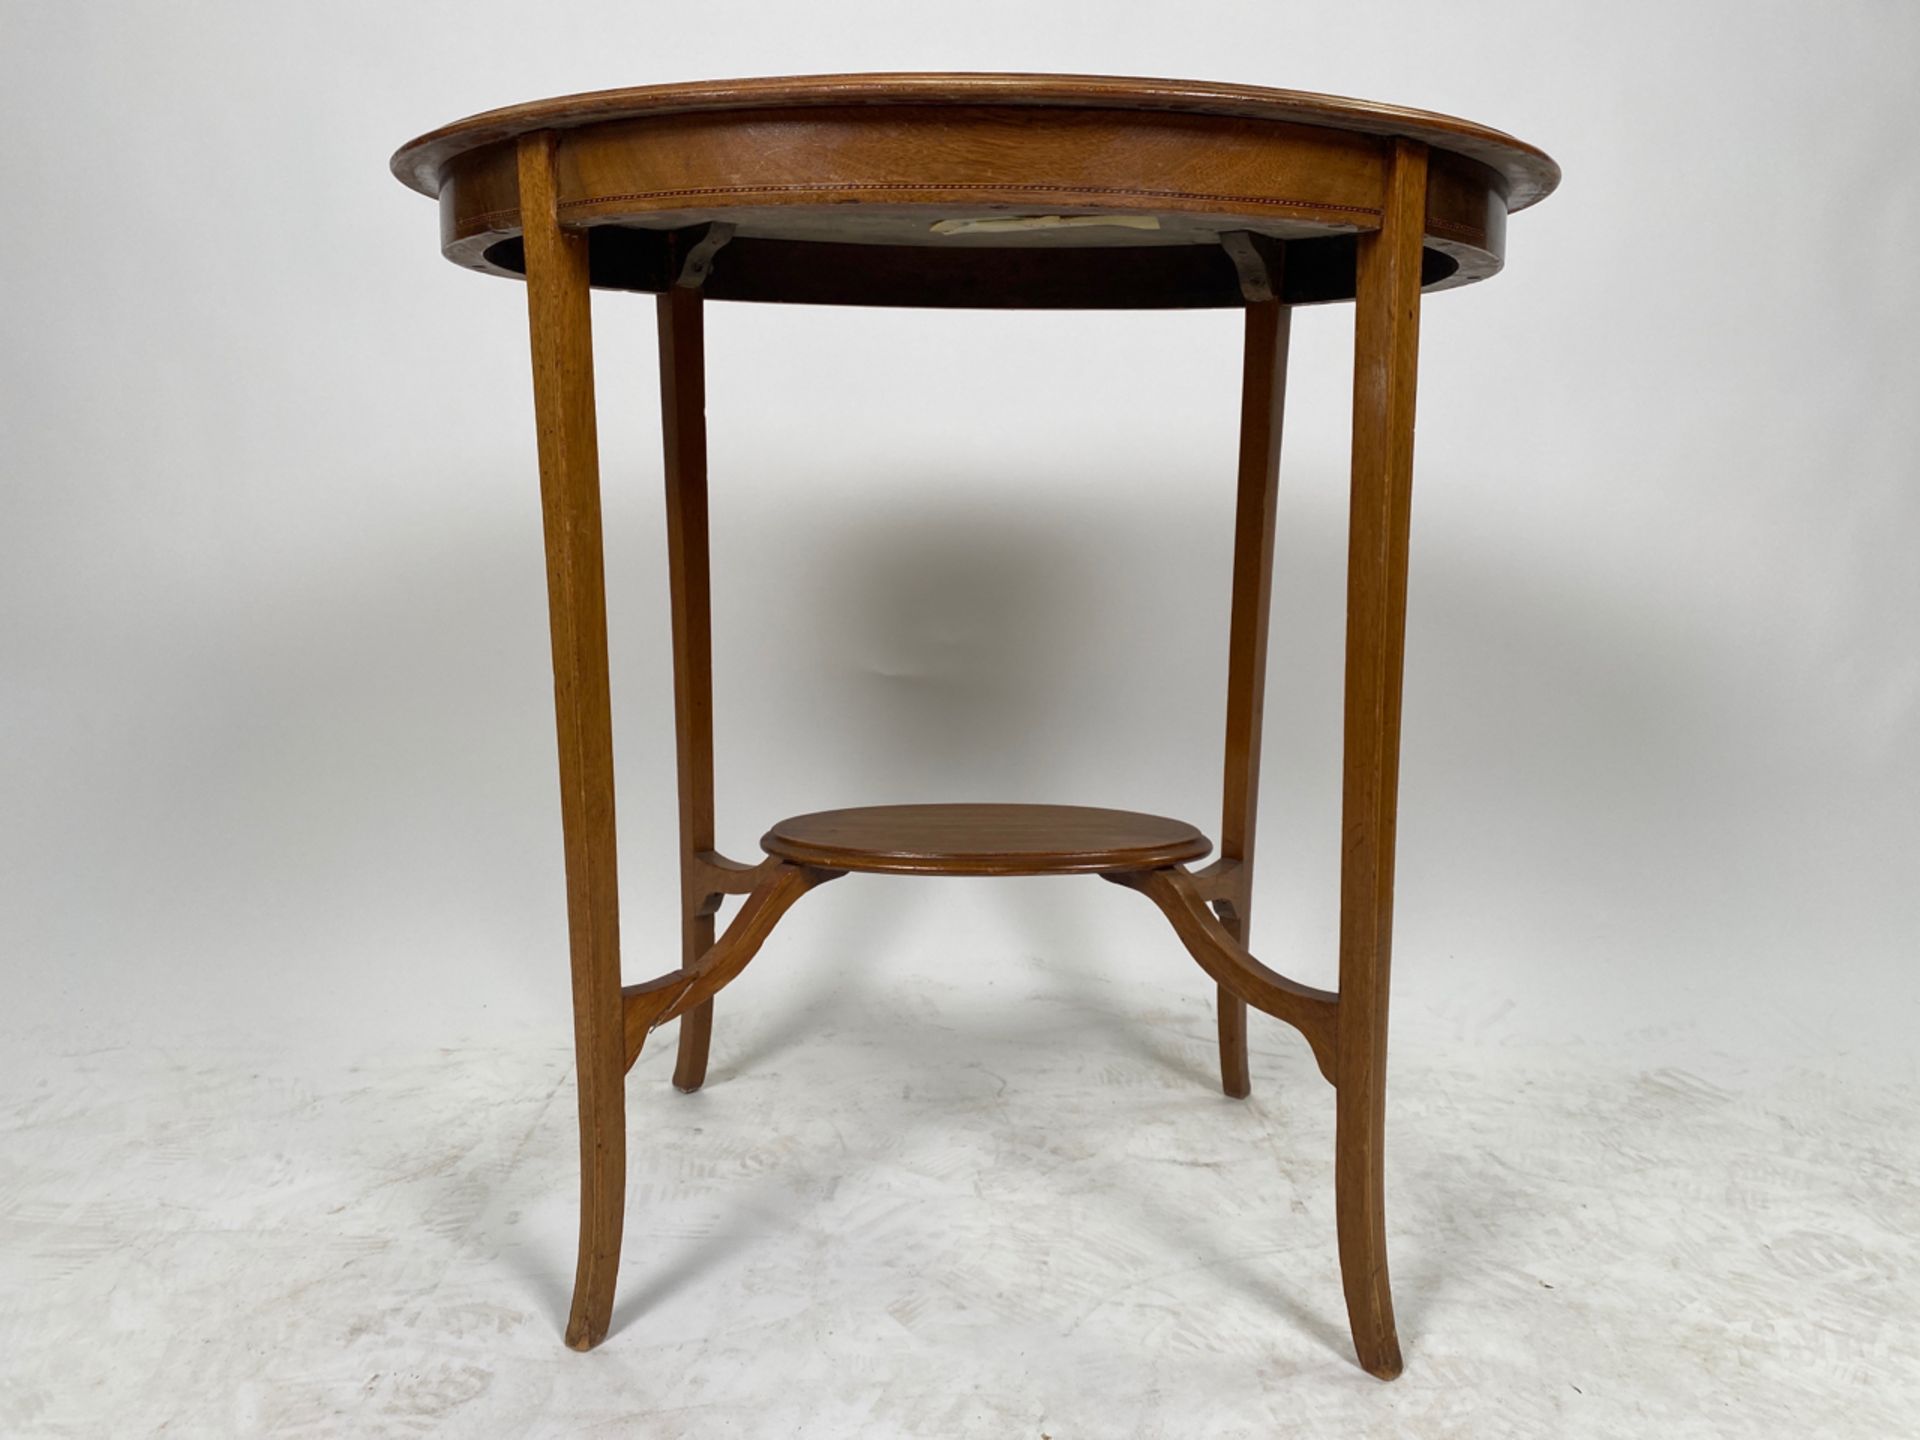 Edwardian Inlaid Side Table Property of the Savoy Group - Image 2 of 2